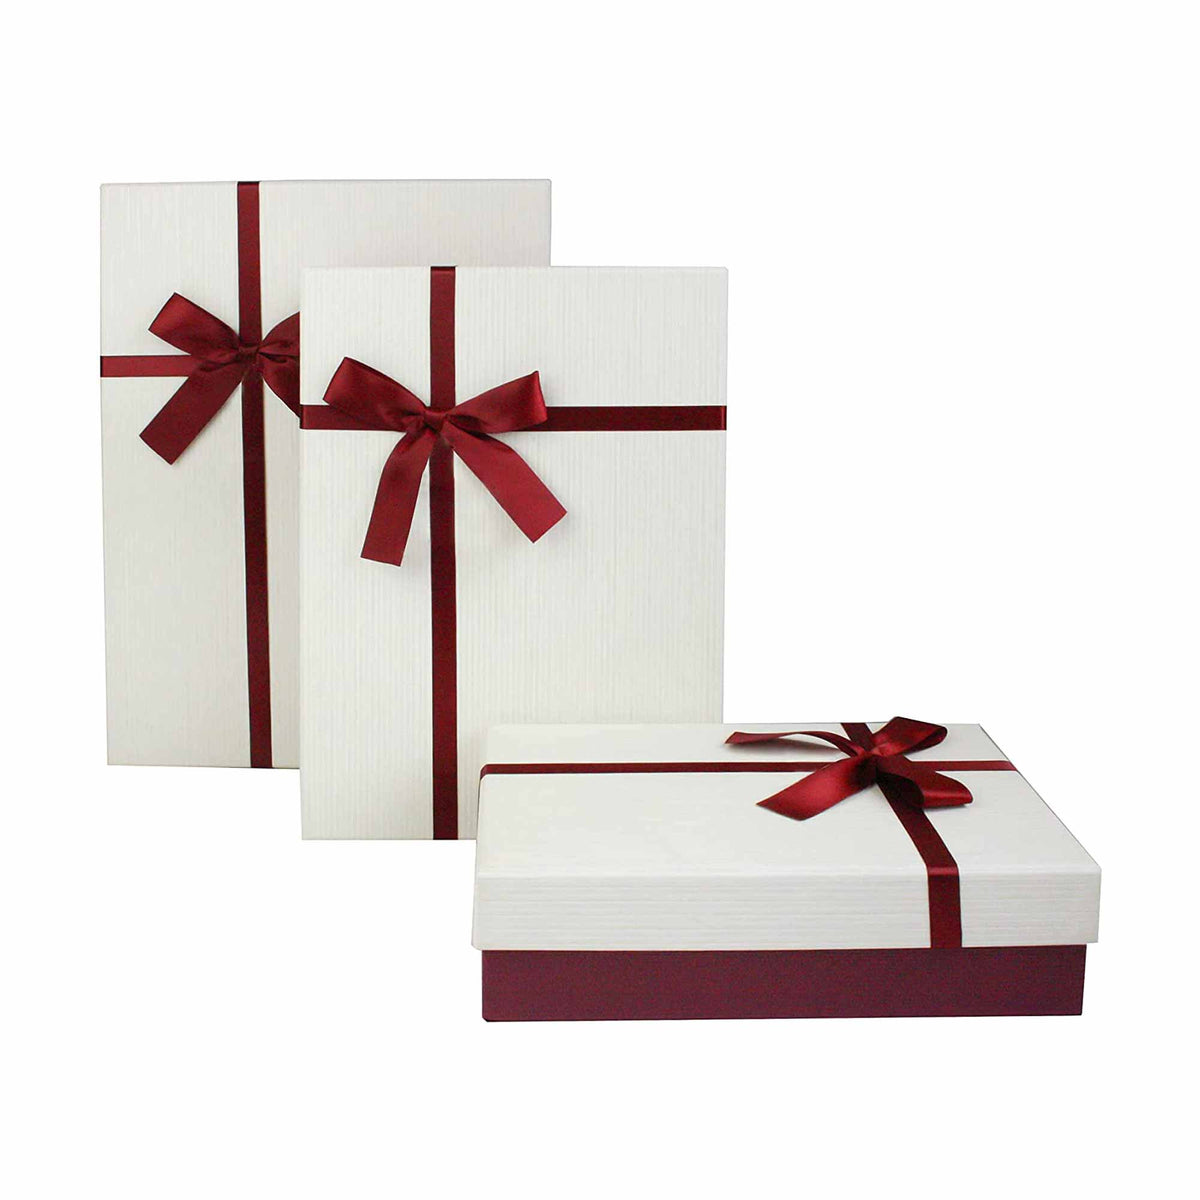 Set of 3 Burgundy/Cream Gift Boxes with Red Satin Ribbon